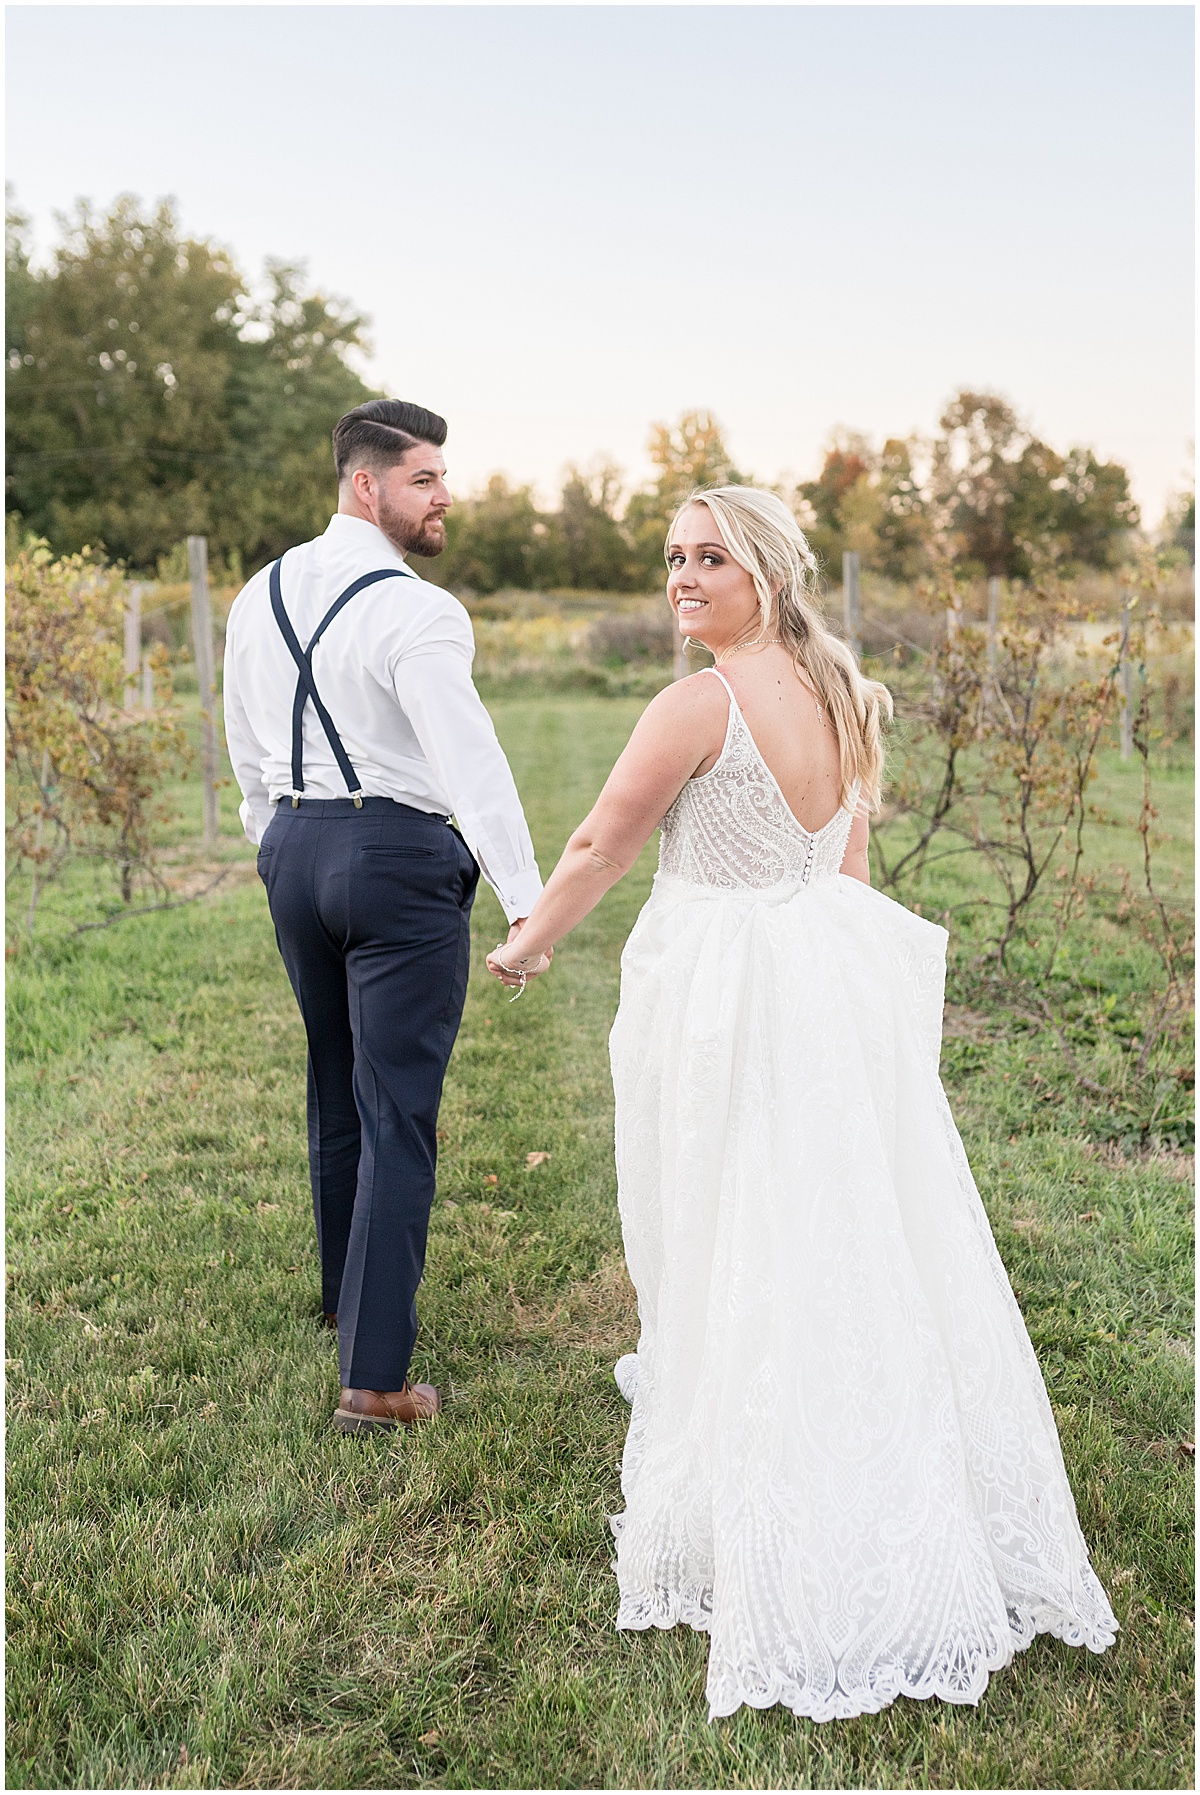 Newlyweds walking through vineyard at wedding at Finley Creek Vineyards in Zionsville, Indiana photographed by Victoria Rayburn Photography